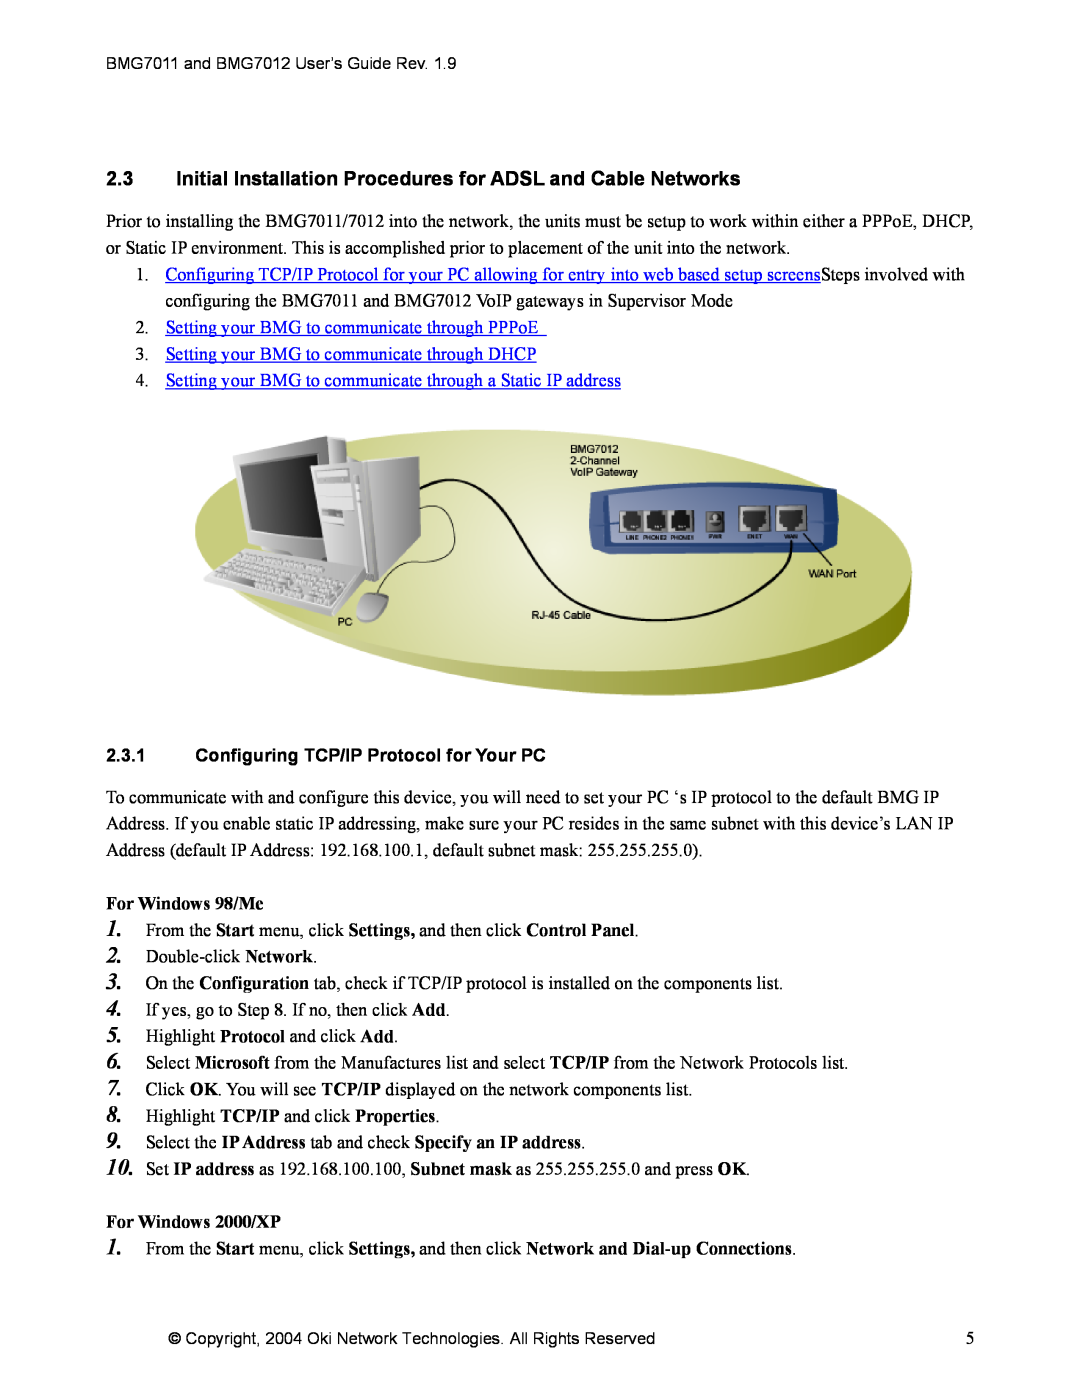 Oki BMG7011, BMG7012 manual 2.3.1Configuring TCP/IP Protocol for Your PC, For Windows 98/Me, For Windows 2000/XP 